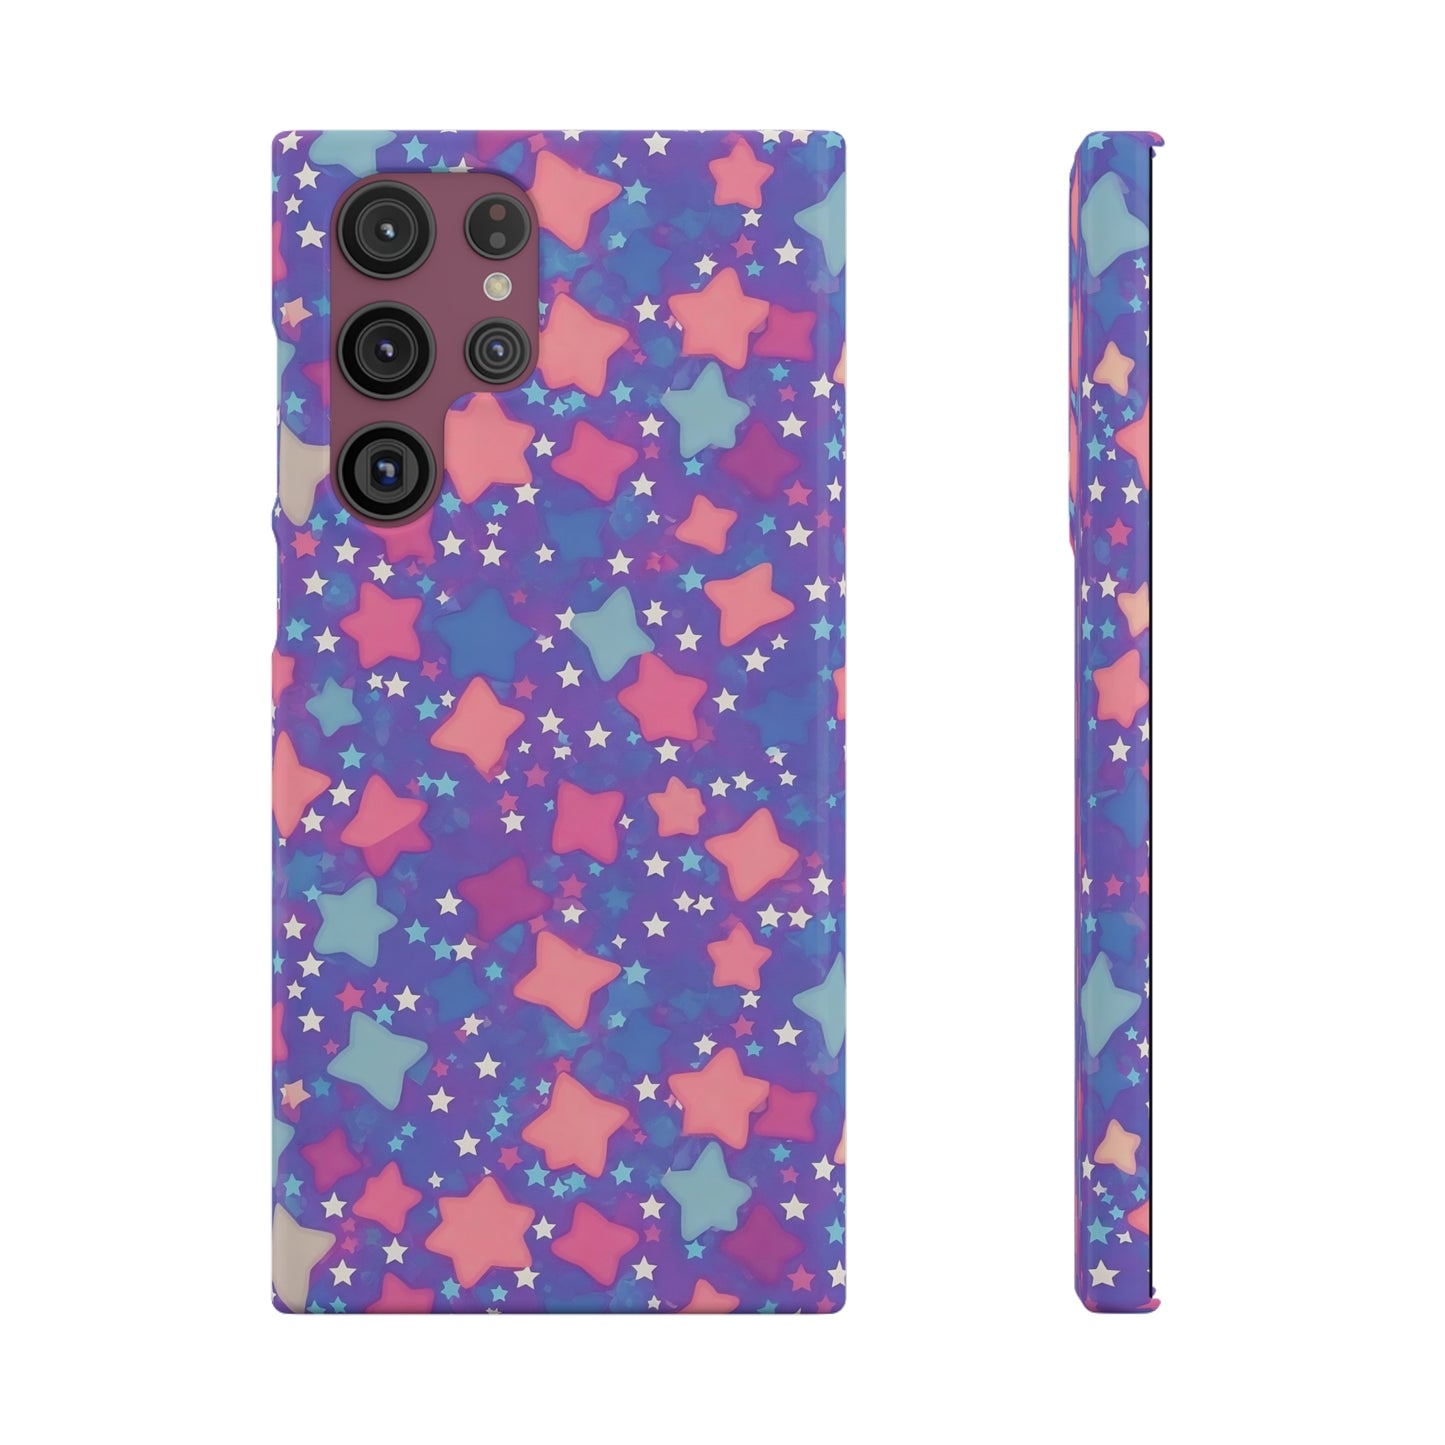 "Cosmic Sparkle" Samsung Snap Cases